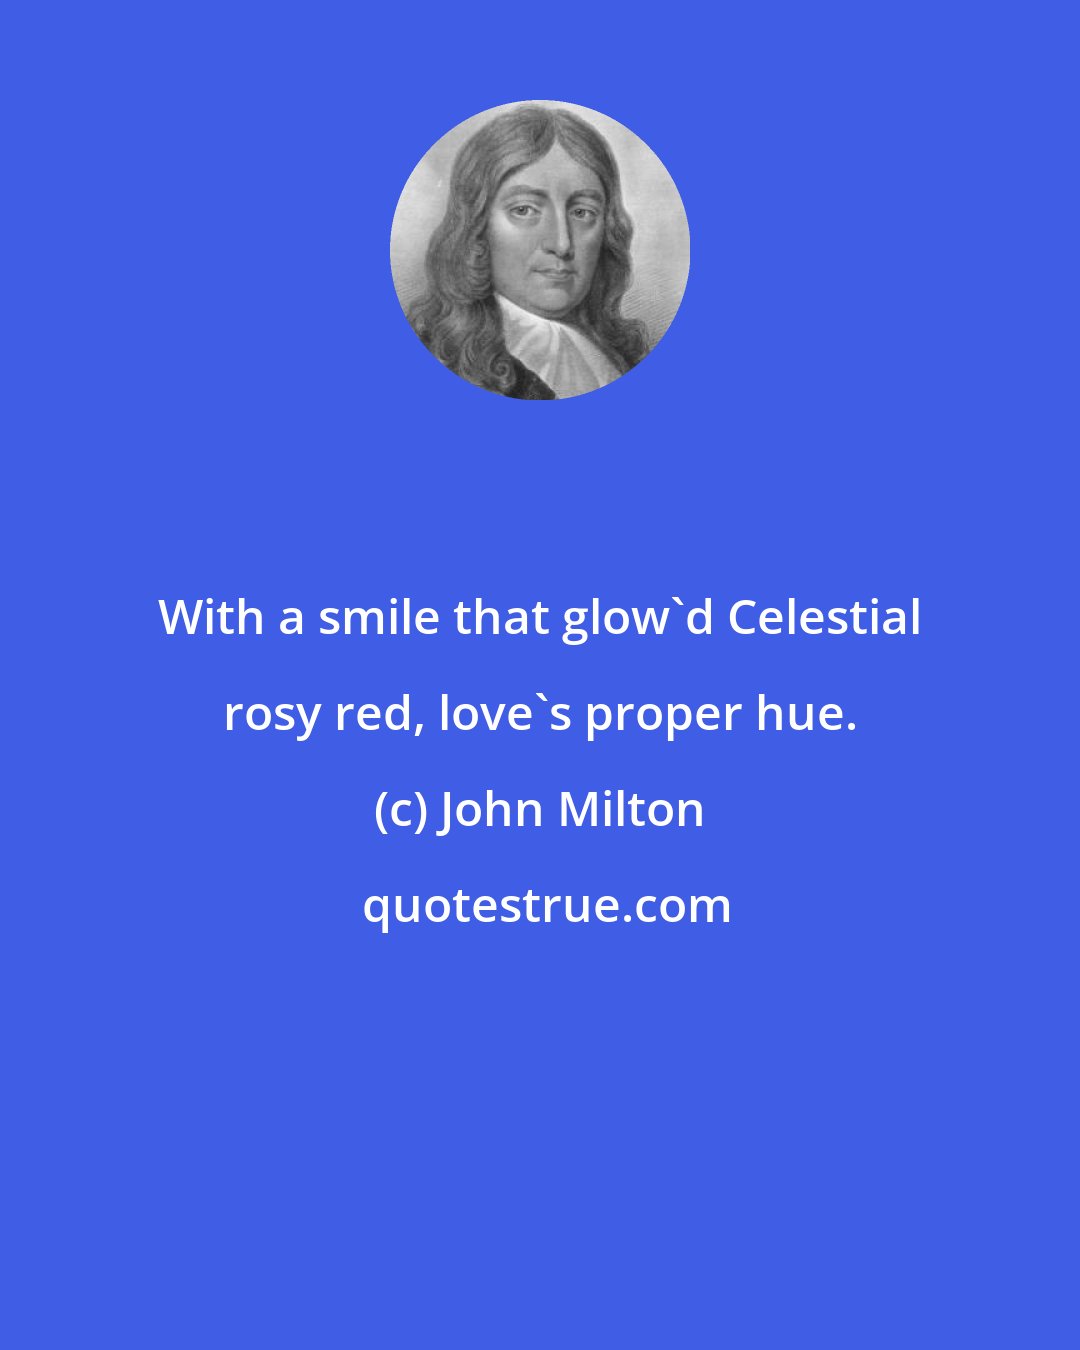 John Milton: With a smile that glow'd Celestial rosy red, love's proper hue.